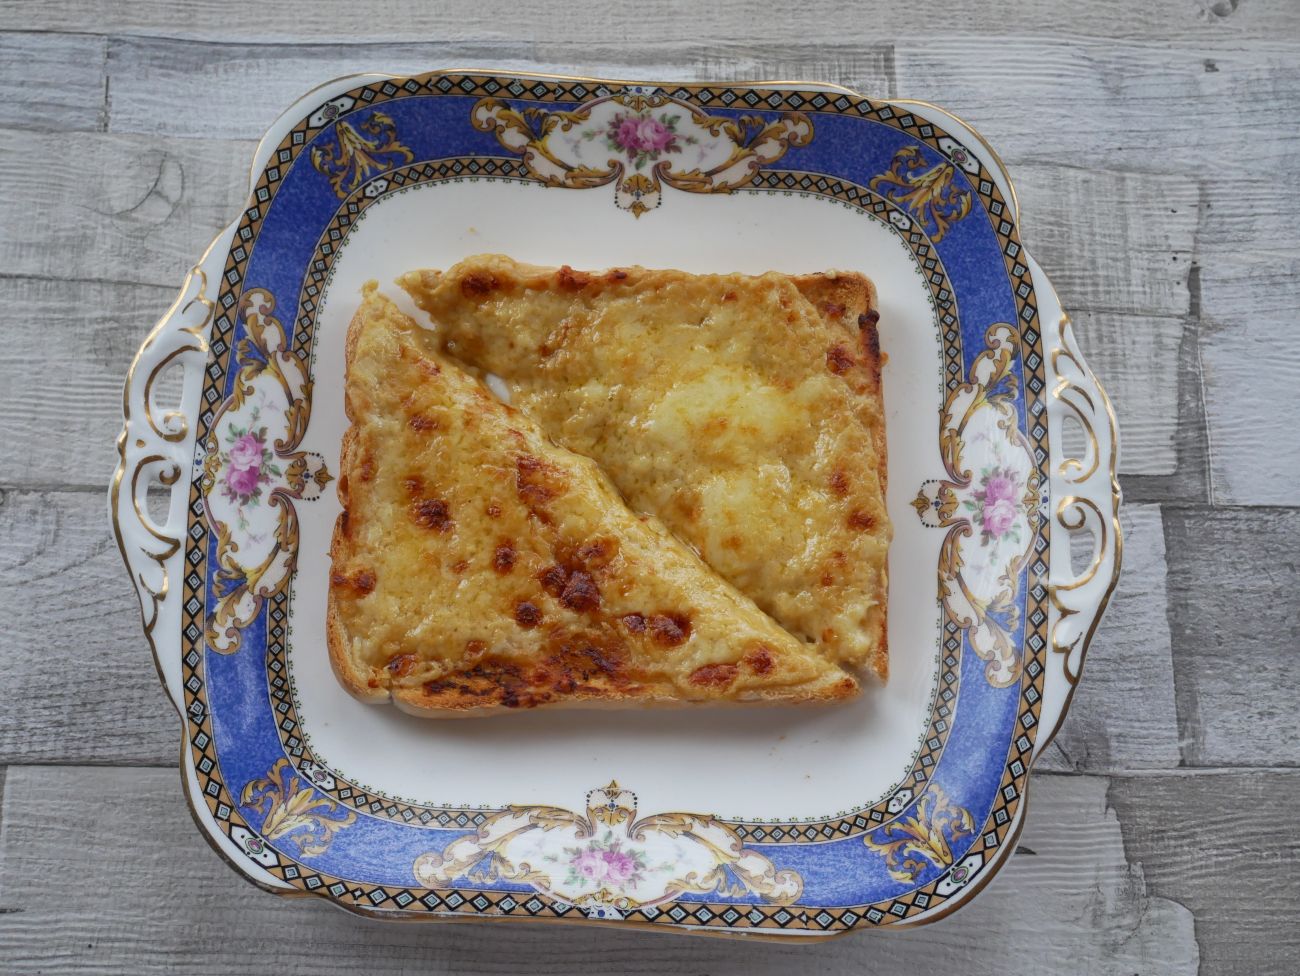 Welsh rarebit on a square plate